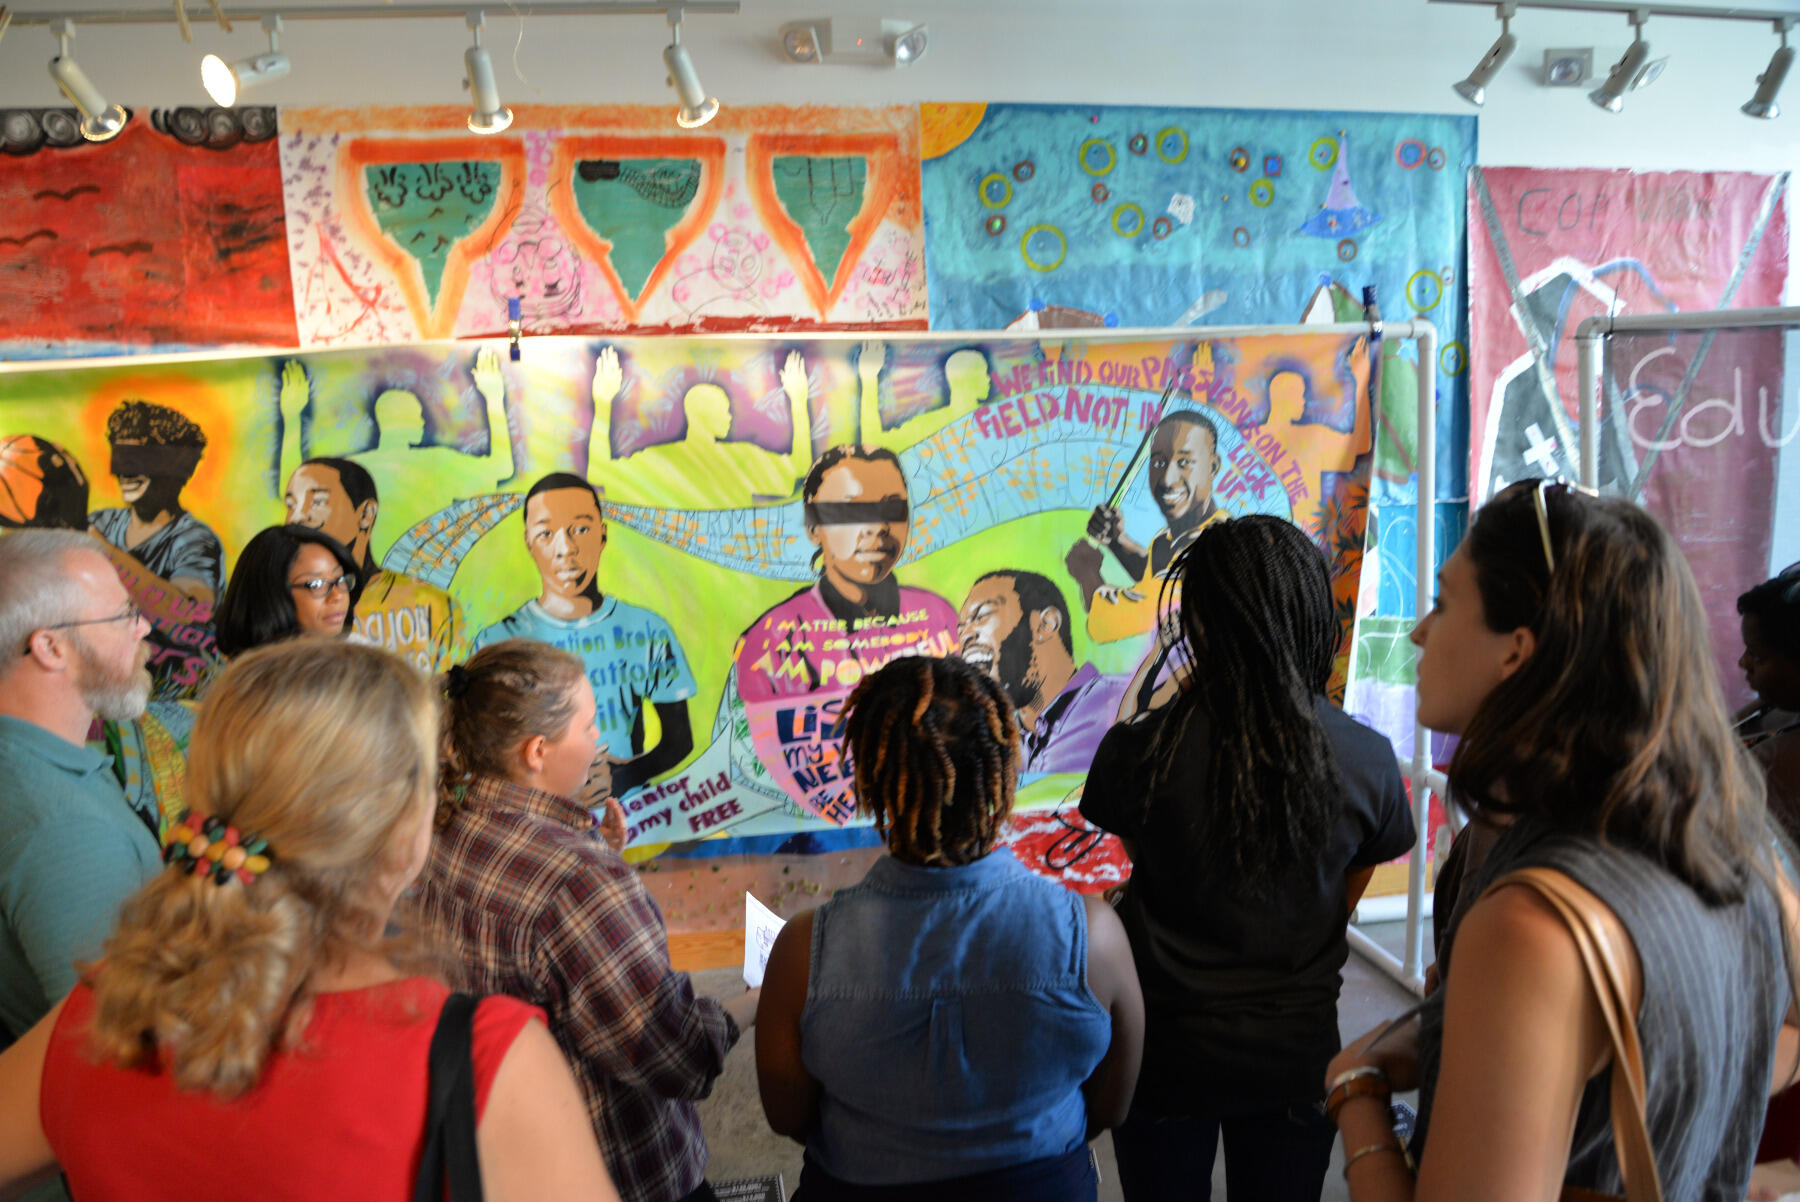 The Richmond [Re]Visited group checked out art produced by incarcerated young people at ART 180.
